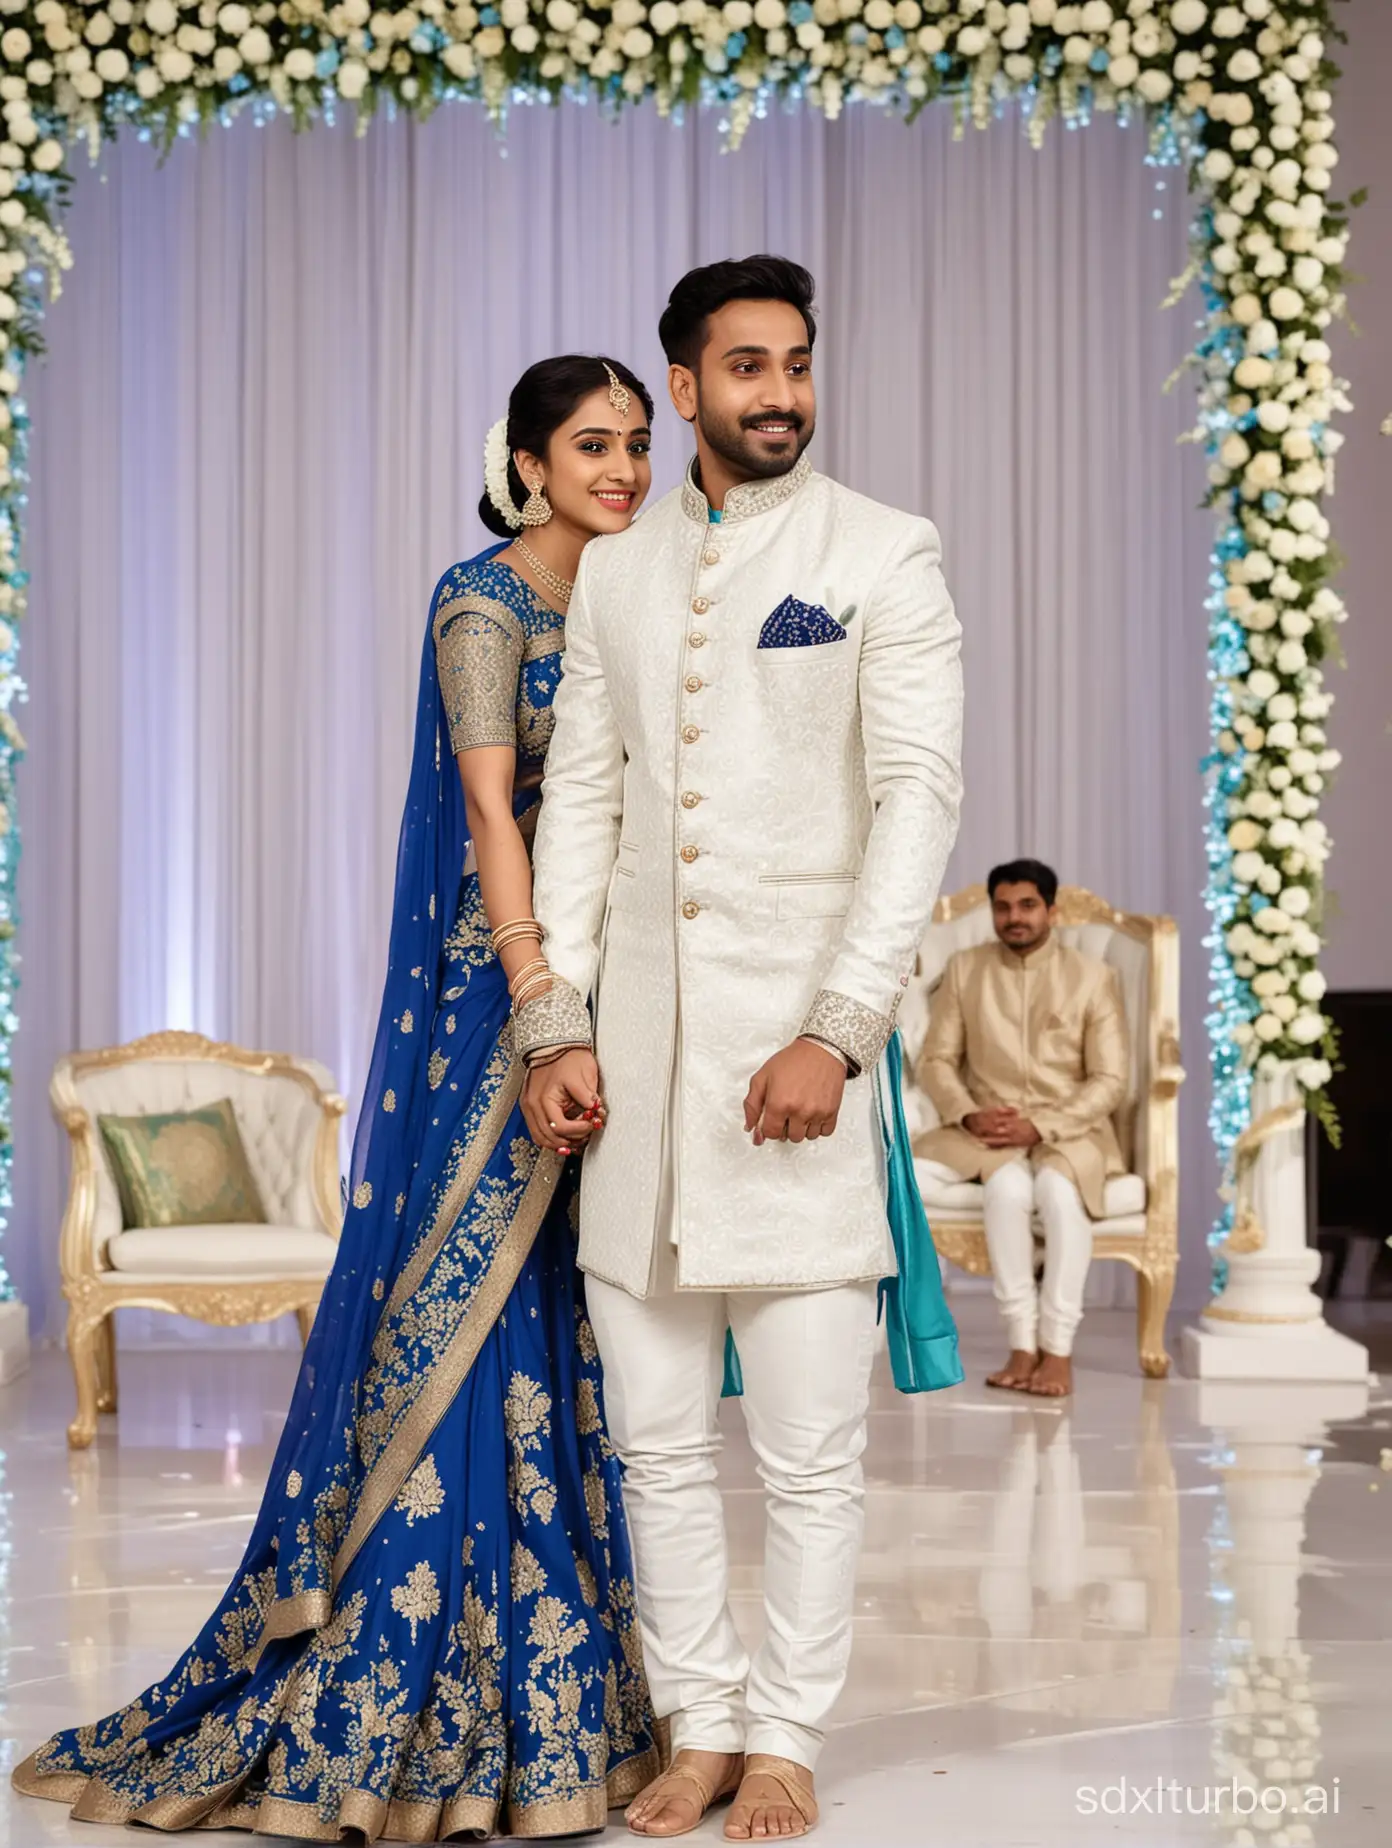 South Indian Bride in royal blue saree and  groom in aqua-white jodhpuri suit without petha on stage with white floral background